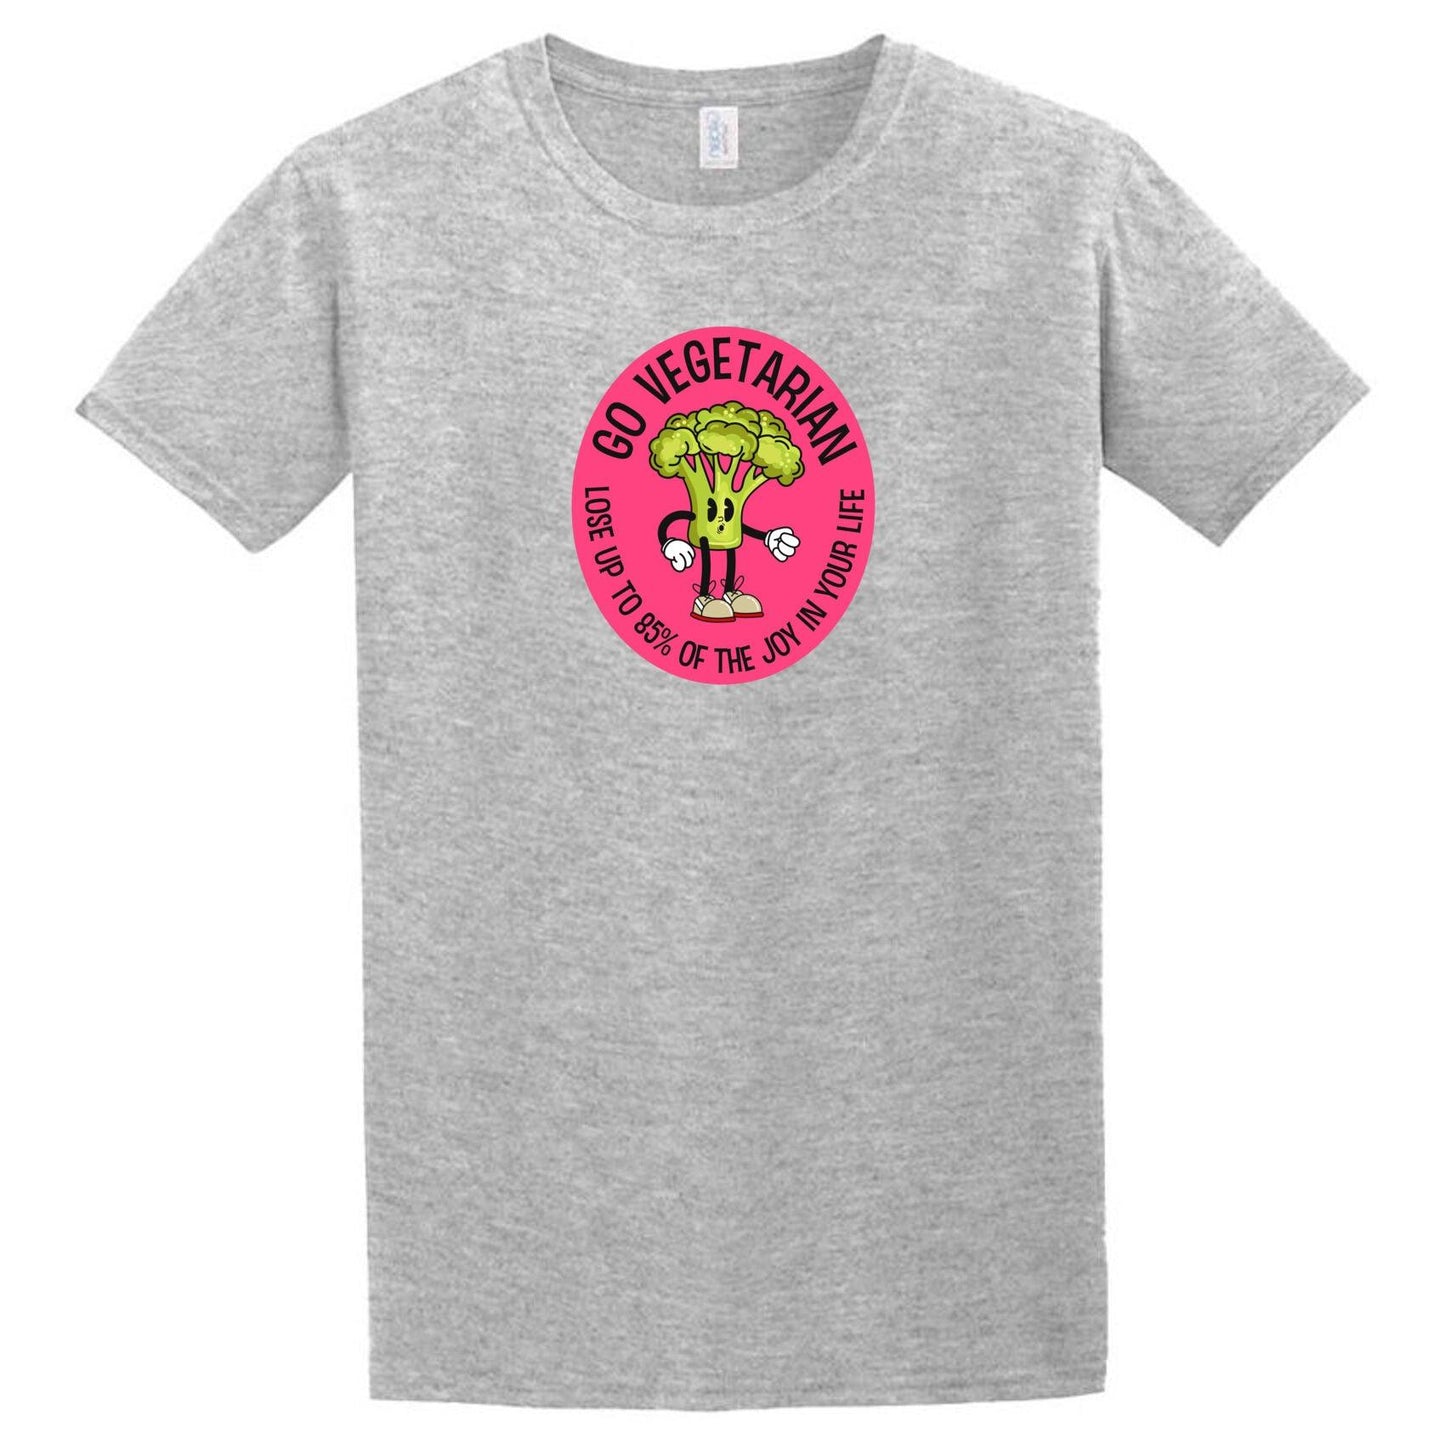 A Joy In Life T-Shirt with a pink and green logo from Twisted Gifts.